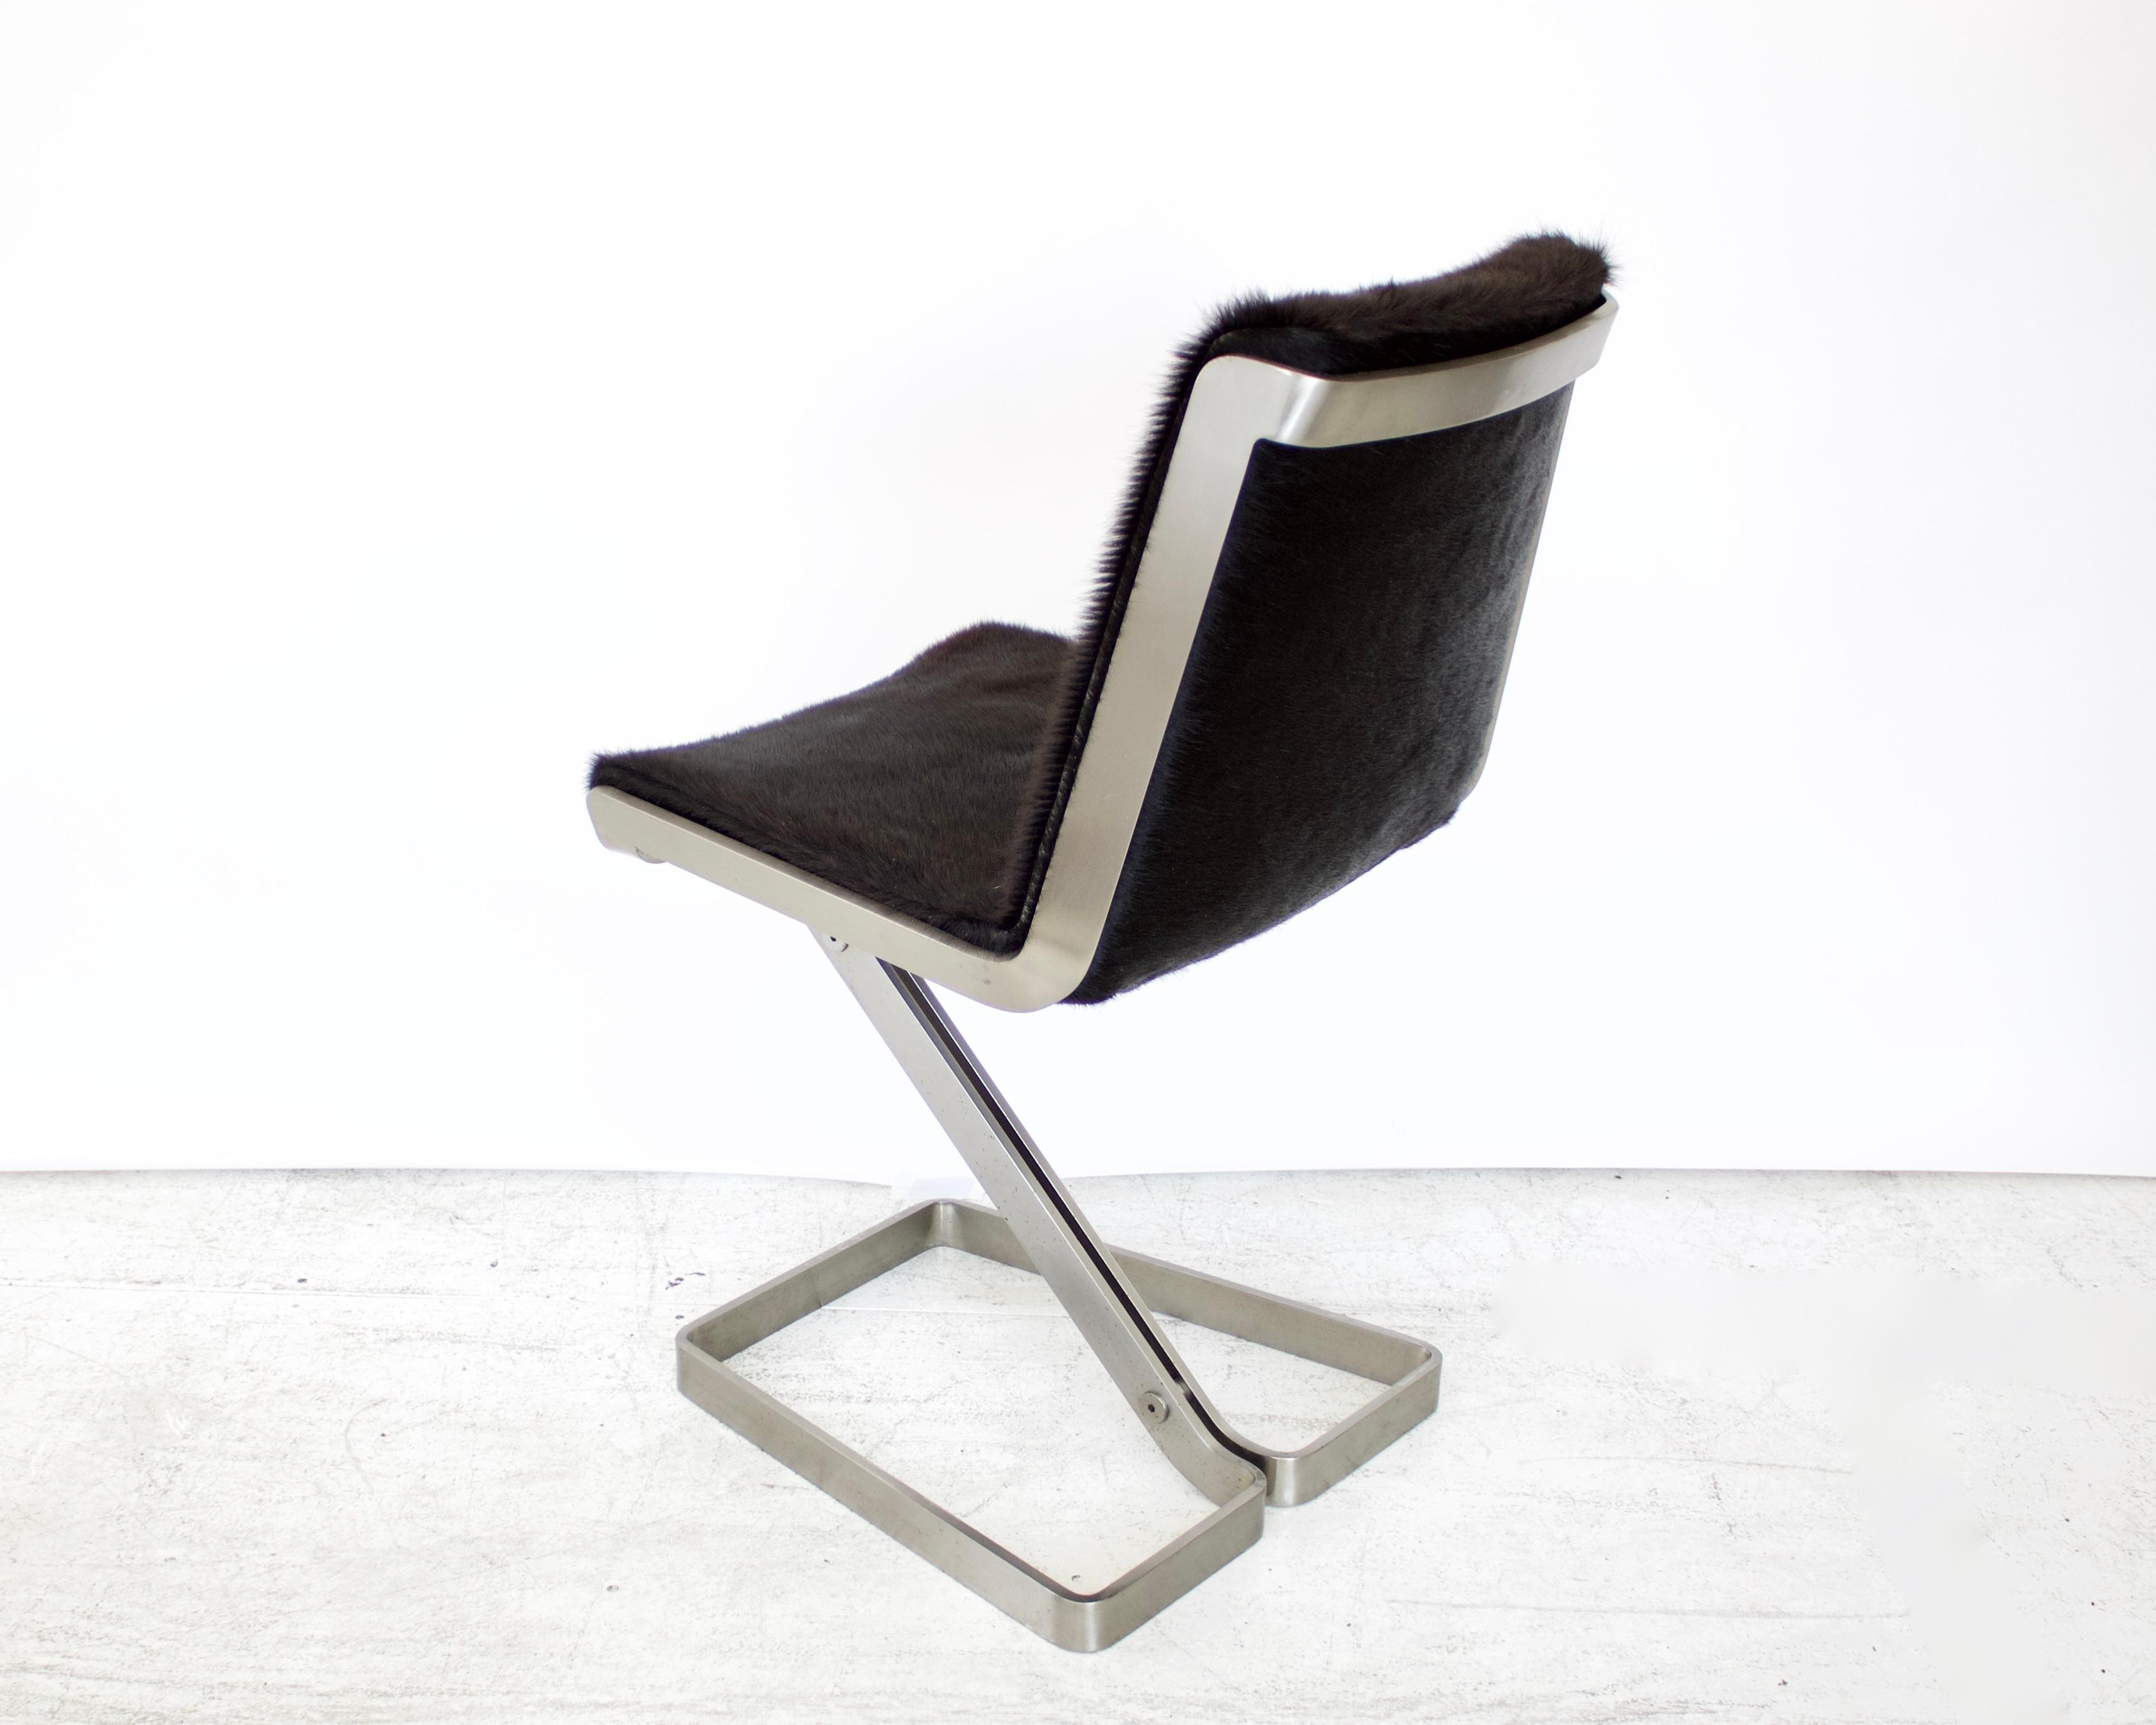 Late 20th Century Italian Stainless Steel Desk Chair by Forma Nova, circa 1970 For Sale